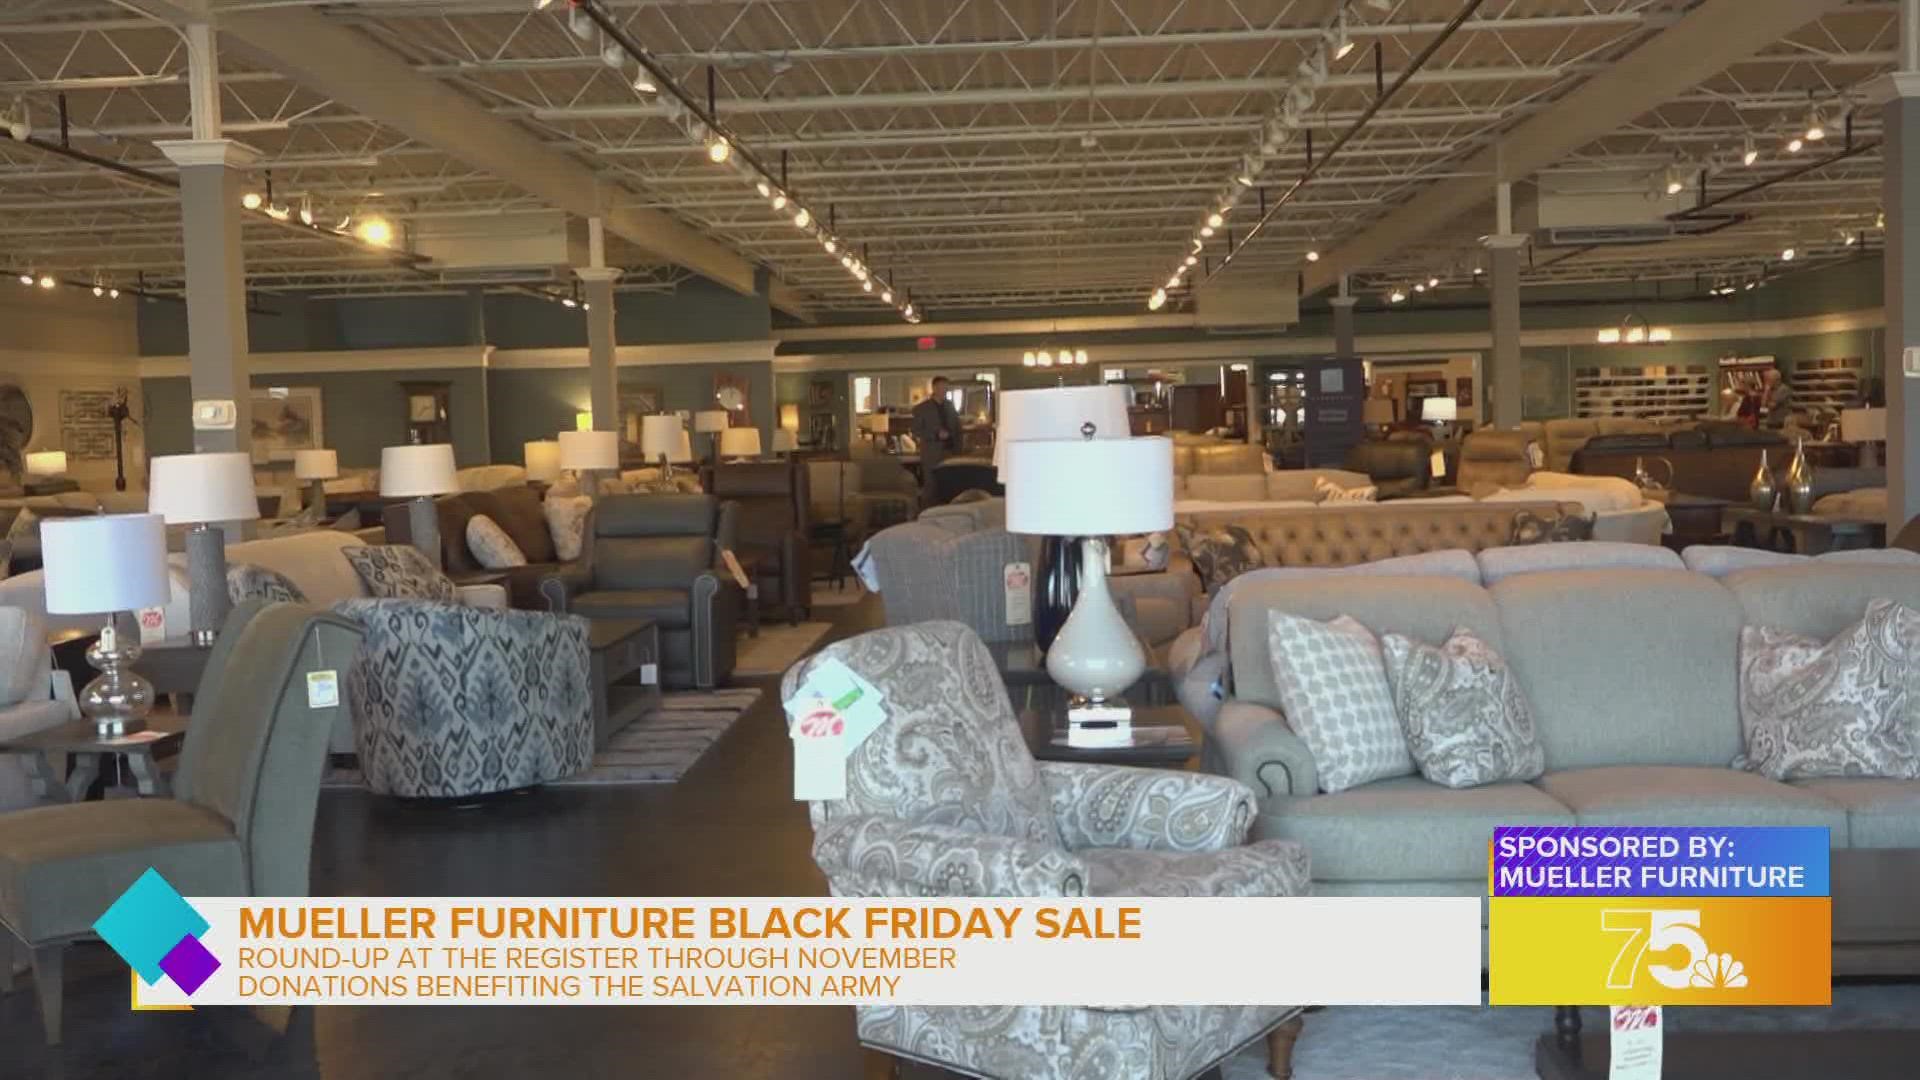 The furniture store is offering a round-up campaign benefiting the Salvation Army throughout the month of Nov. and will be matching customer donations.